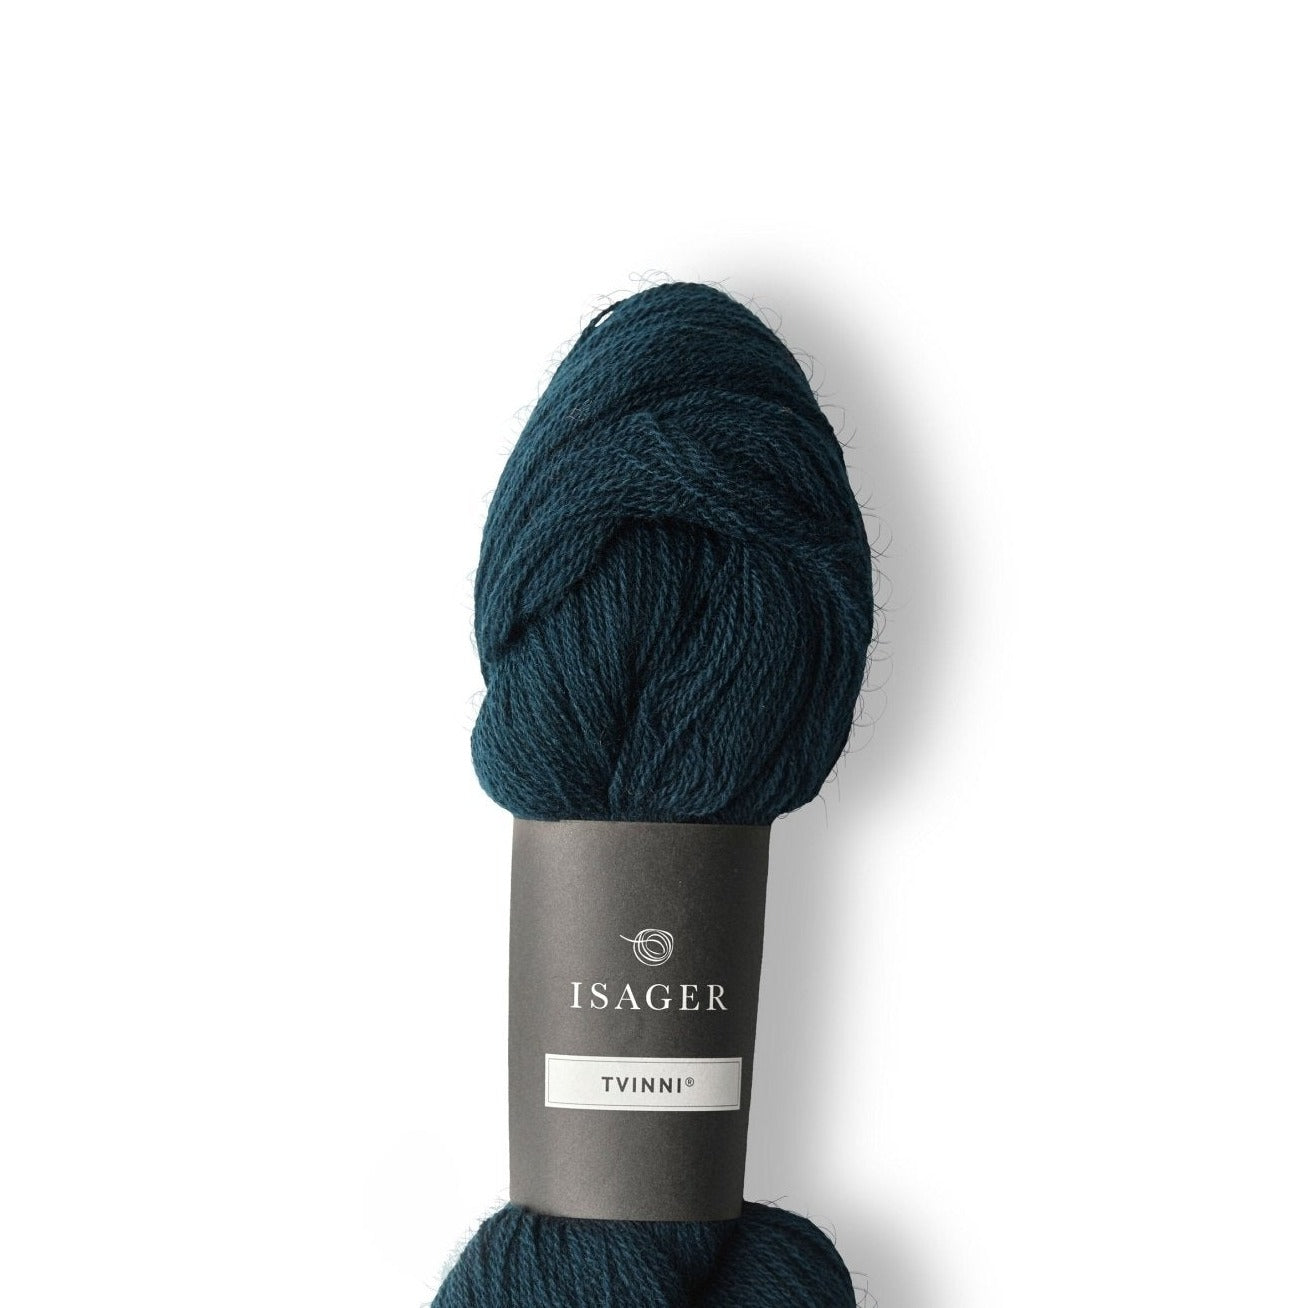 Isager Tvinni - 101 - 4 Ply - Isager - The Little Yarn Store